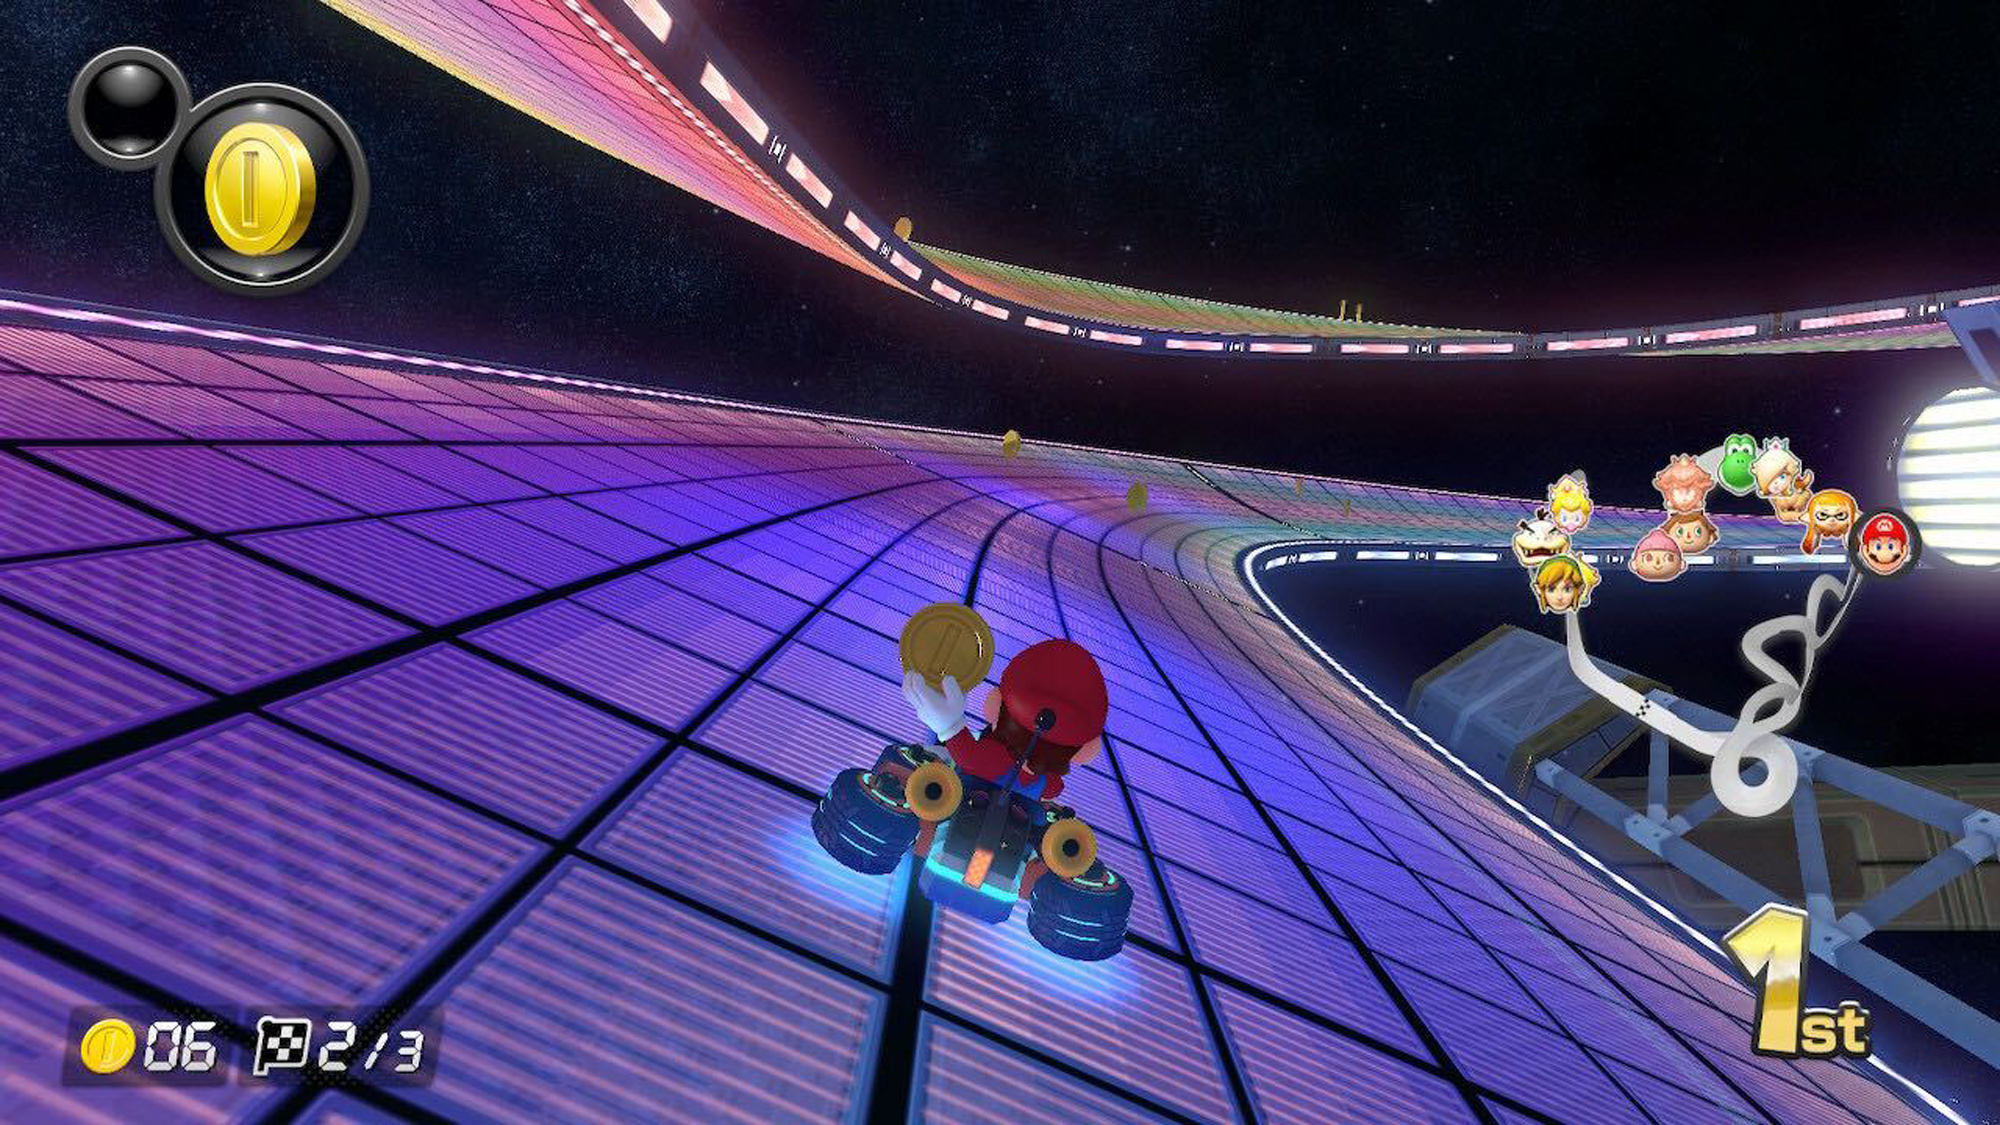 Could Mario Kart Teach Us How to Reduce World Poverty and Improve